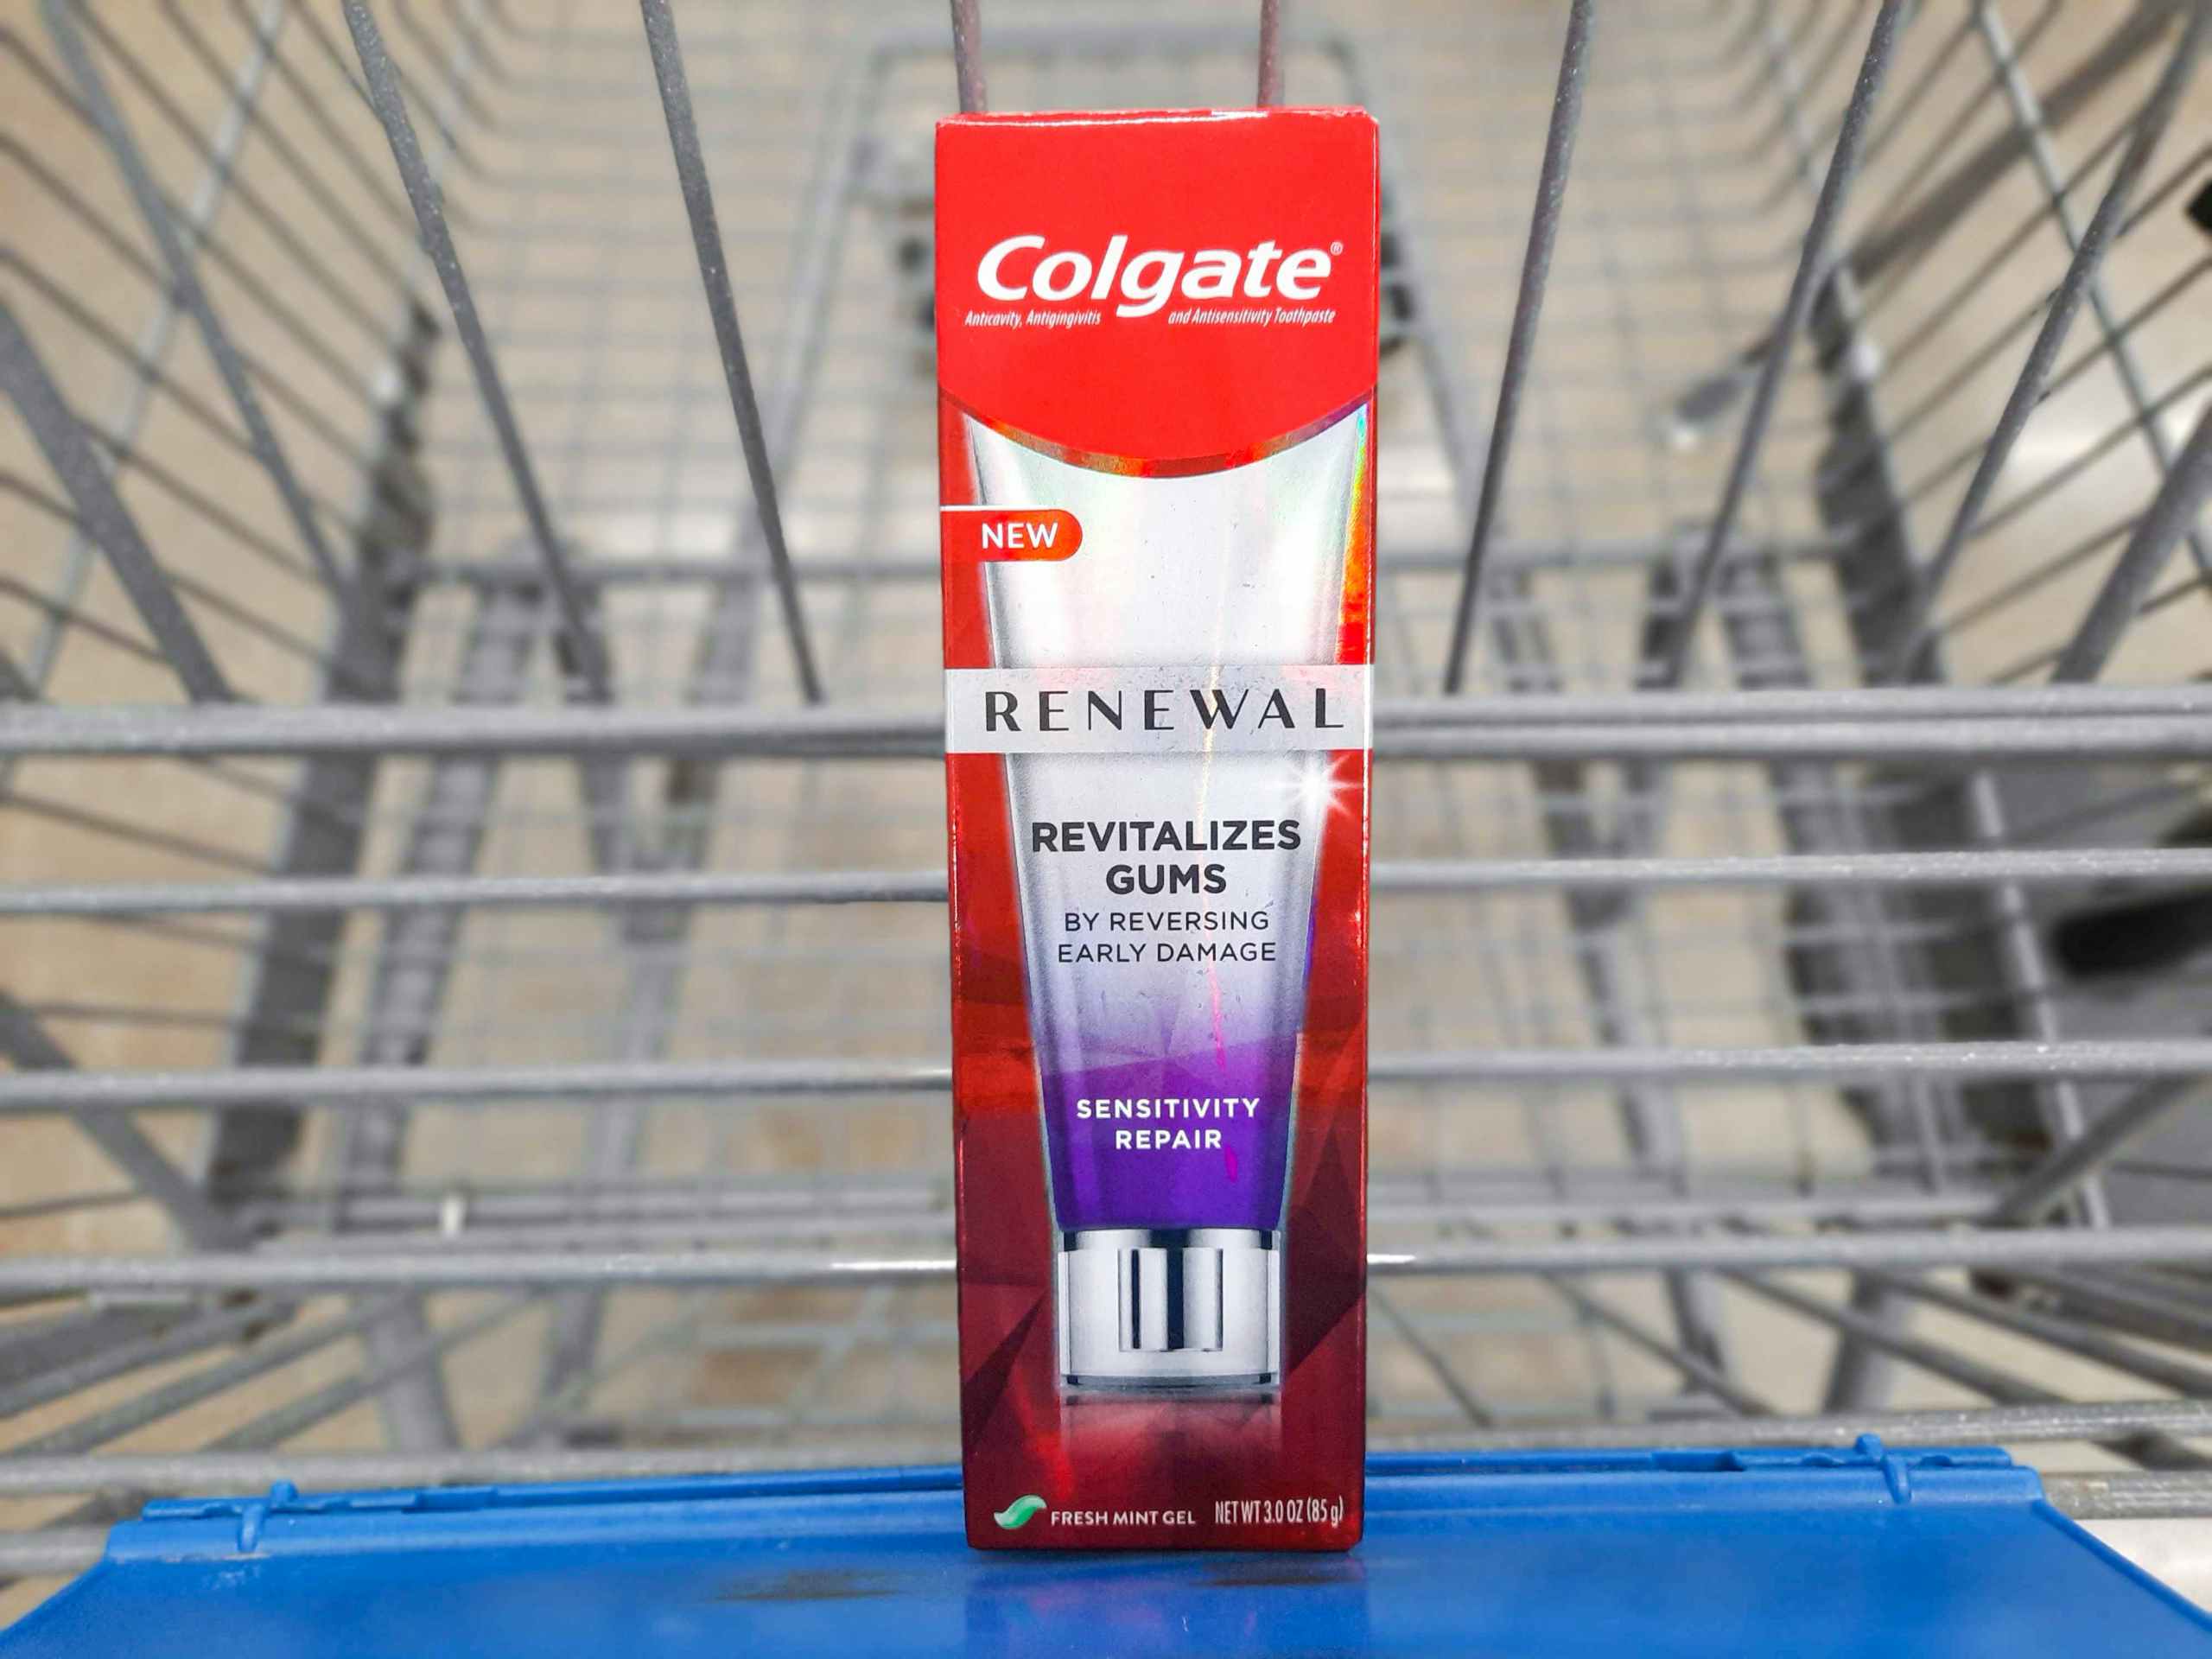 Colgate toothpaste box in Walmart shopping cart